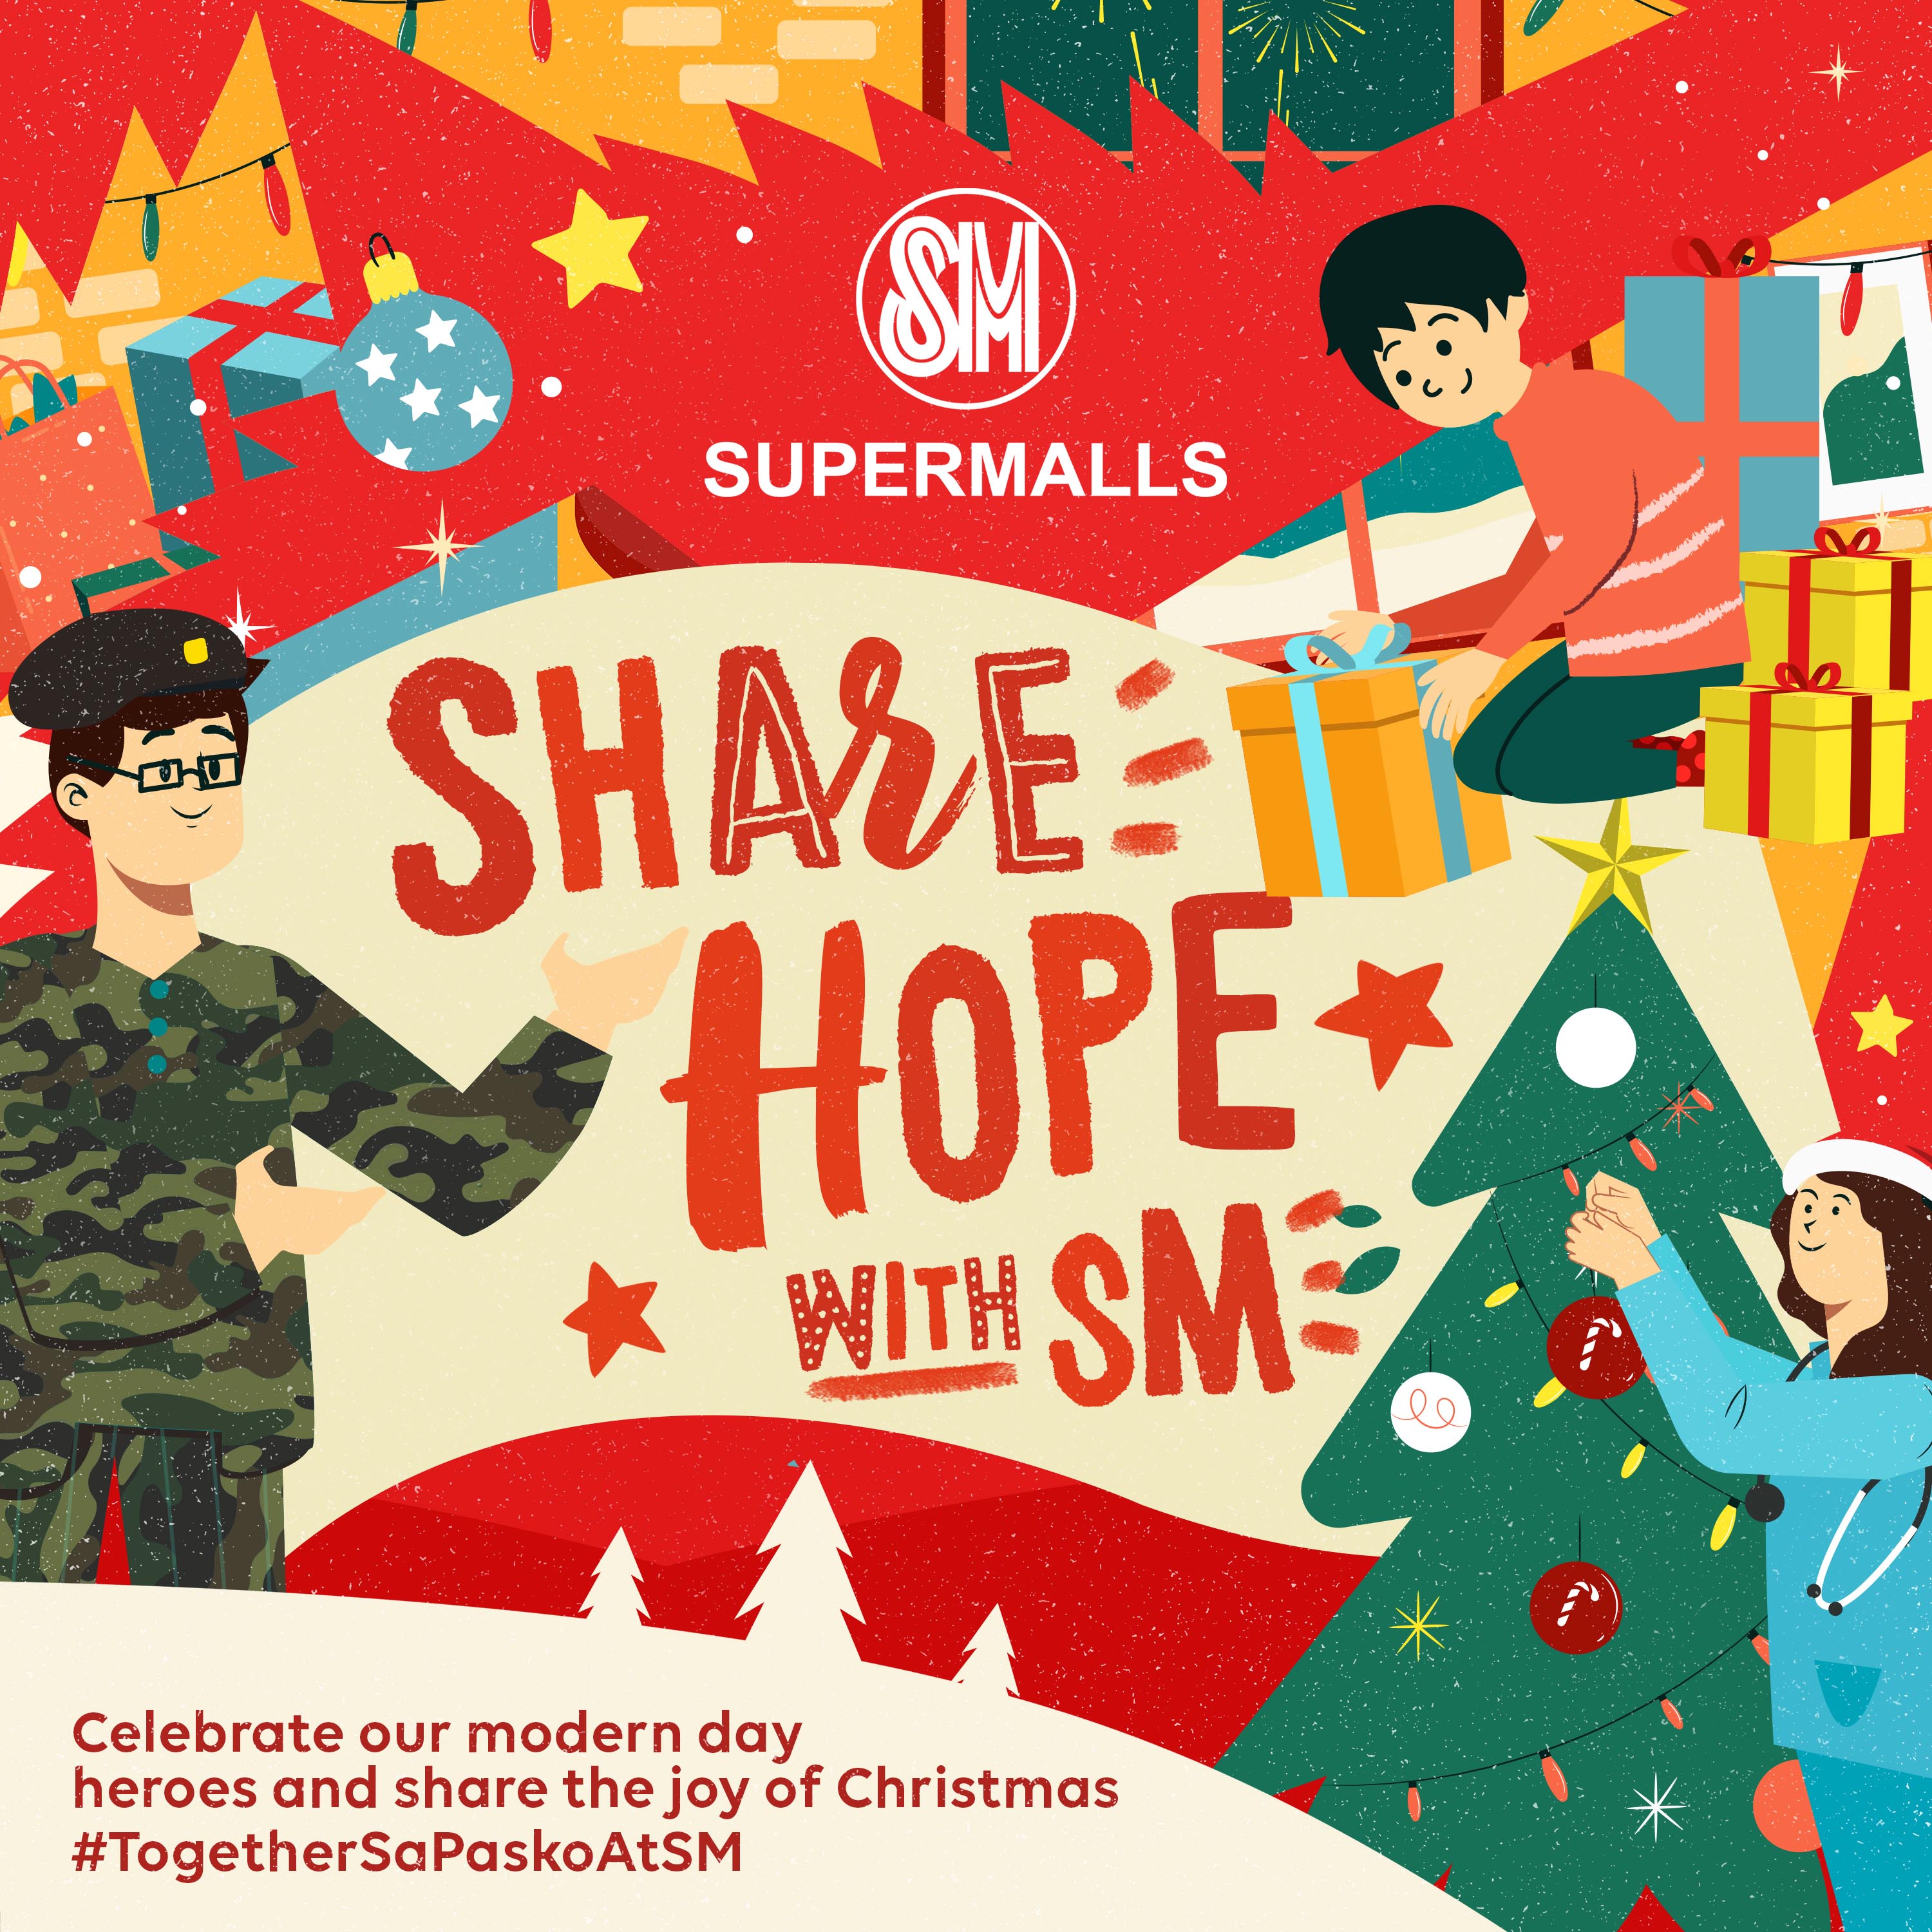 SM gives away 10K worth of SM gift certificates  to 5 frontliners via #ShareHopeWithSM!